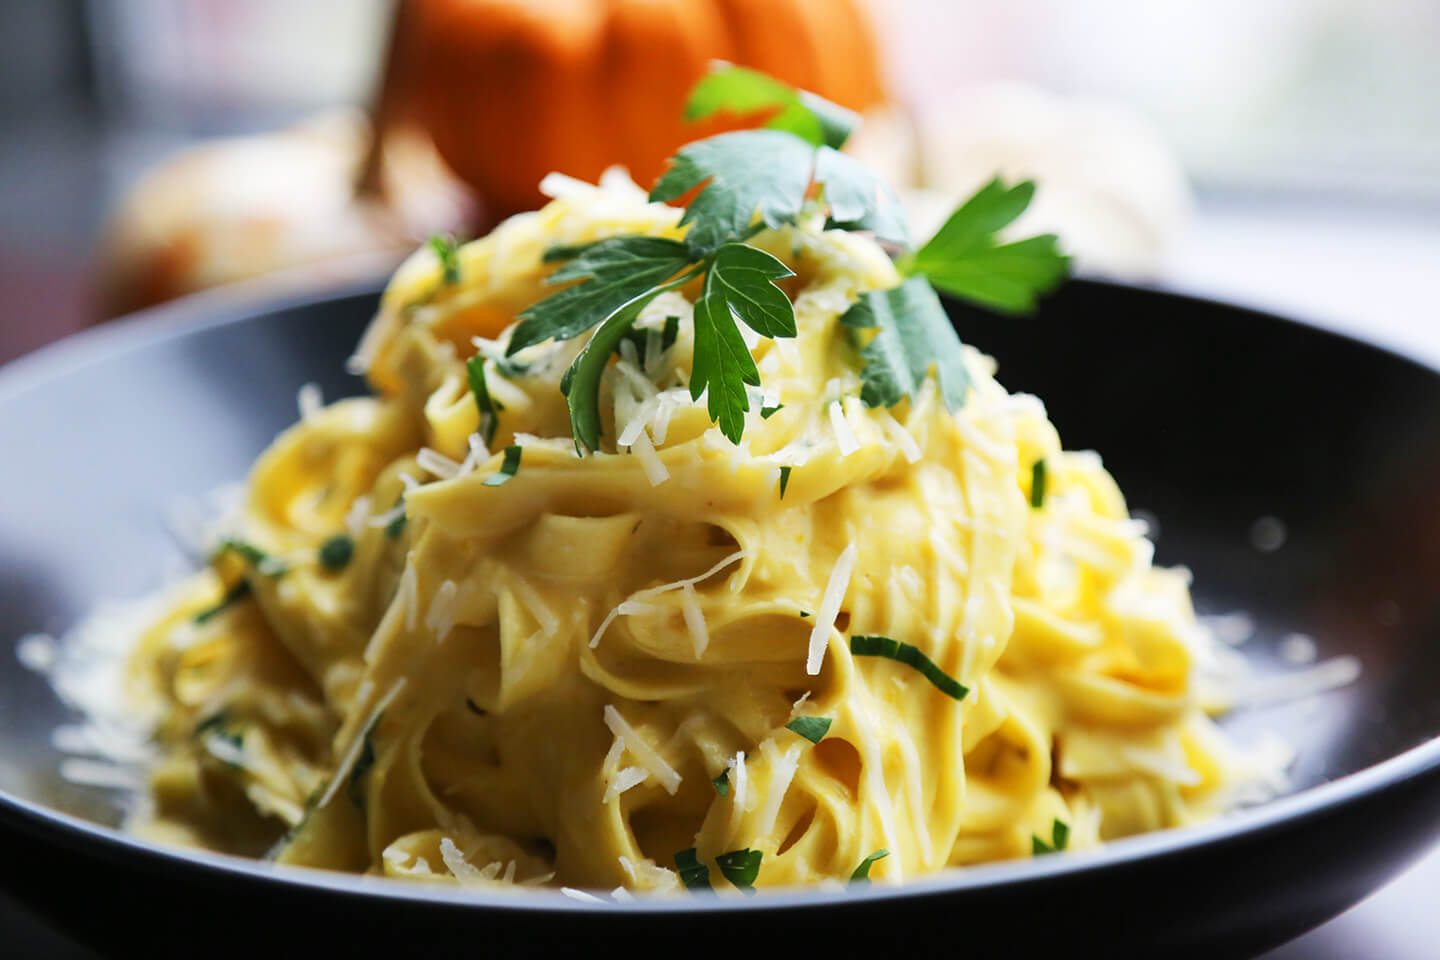 This pumpkin Alfredo will satisfy all your autumn comfort food cravings!